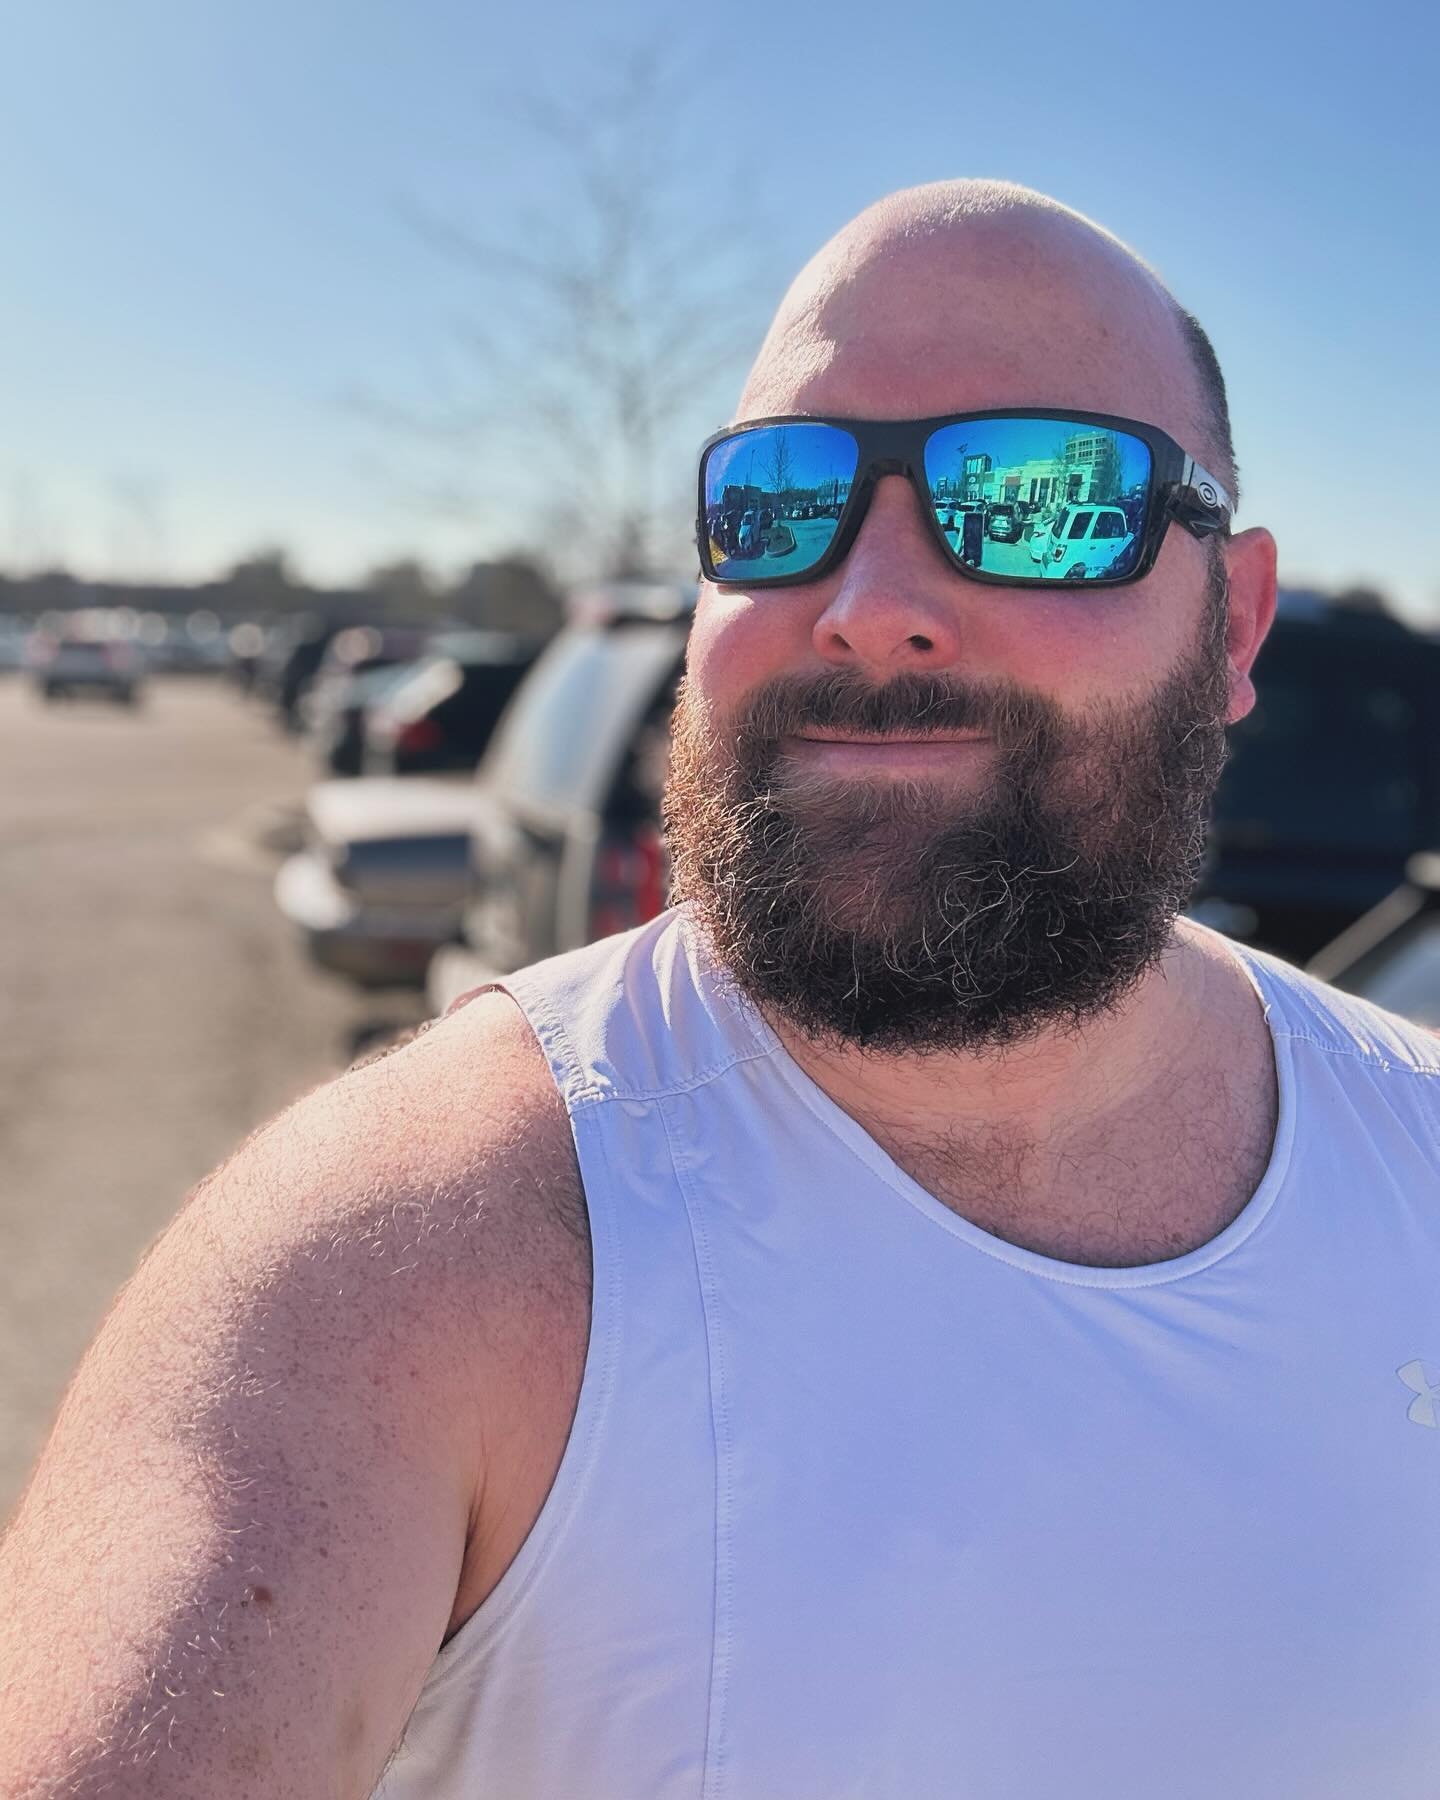 Suns out this morning, which means the hairy shoulders are too. 
#bearlove #bearstagram #hairyscruffhomo #hairyscruff #stockybears #beardedhomo #hairybearlife #hairybeardedcub #gaybear #gaybearded #gaycub #beardedgay #instagay #gay #bearsofinstagram #cubsofinstagram #hairychest #gaysofinstagram #scruff #bear #hairy #fur